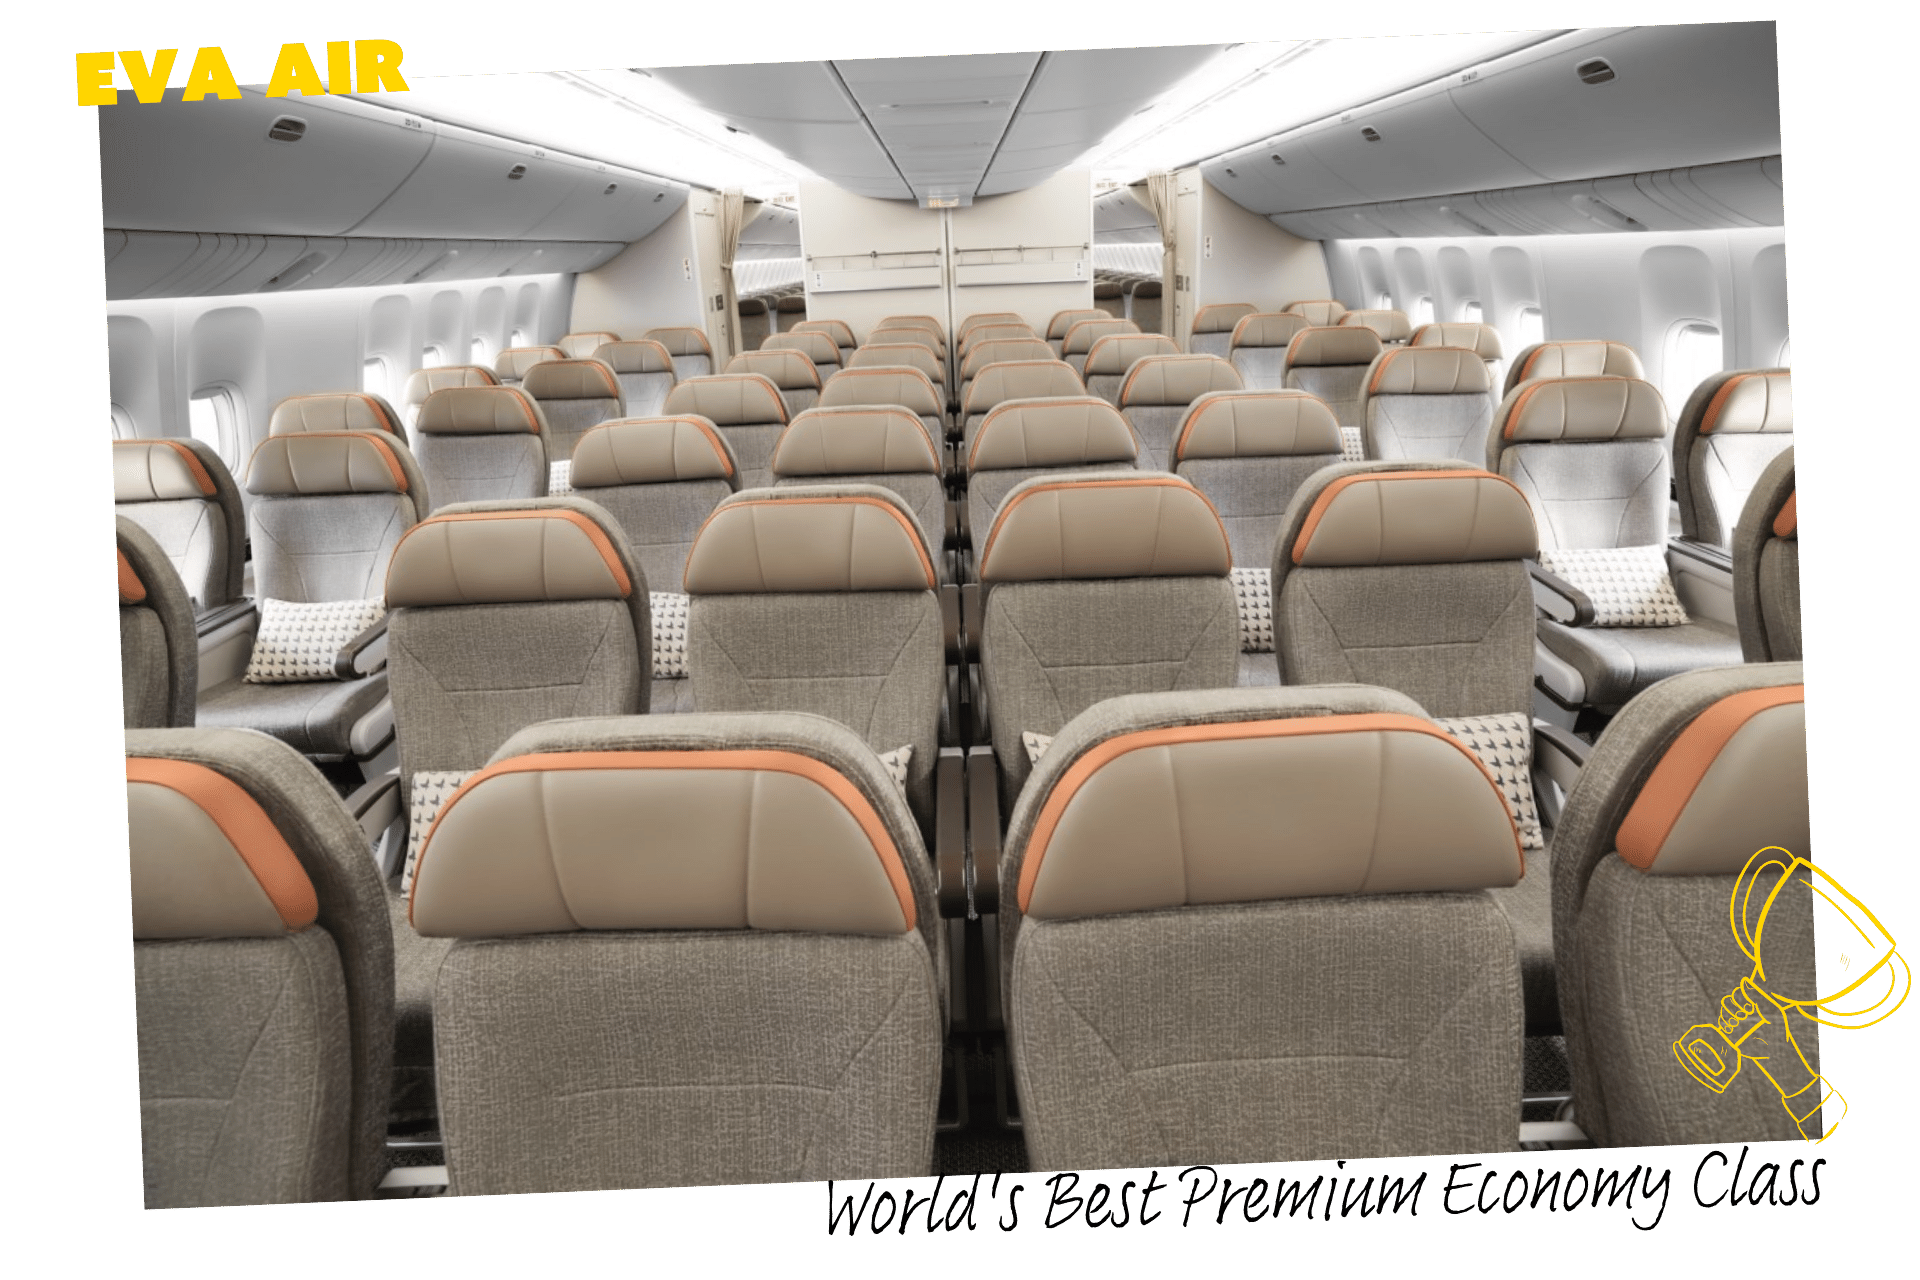 EVA Air is one of the world's best airlines, Skytrax Awards 2023